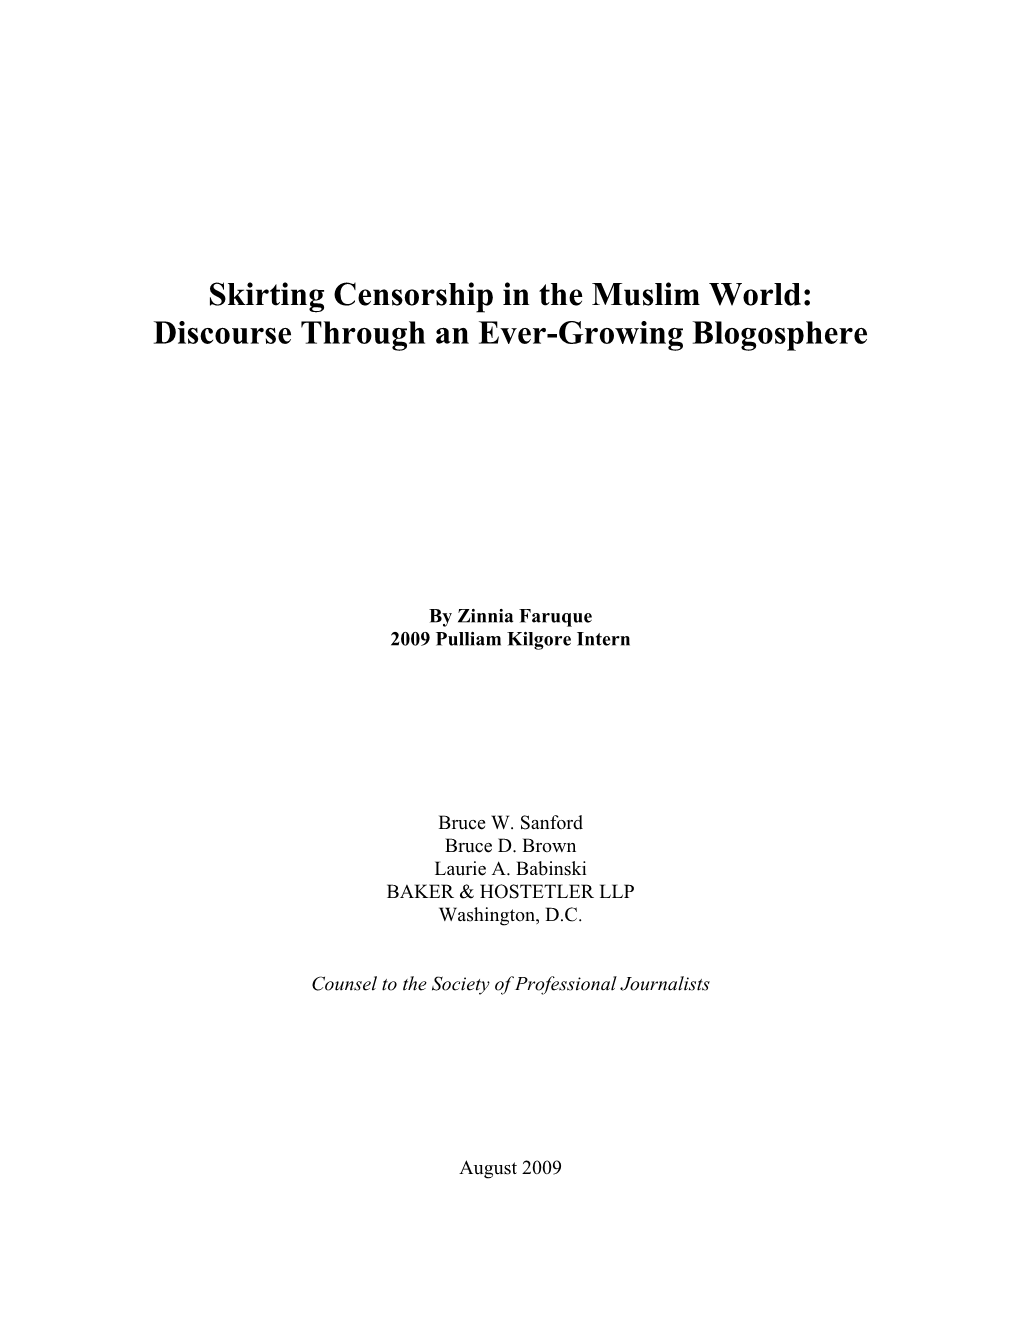 Skirting Censorship in the Muslim World: Discourse Through an Ever-Growing Blogosphere